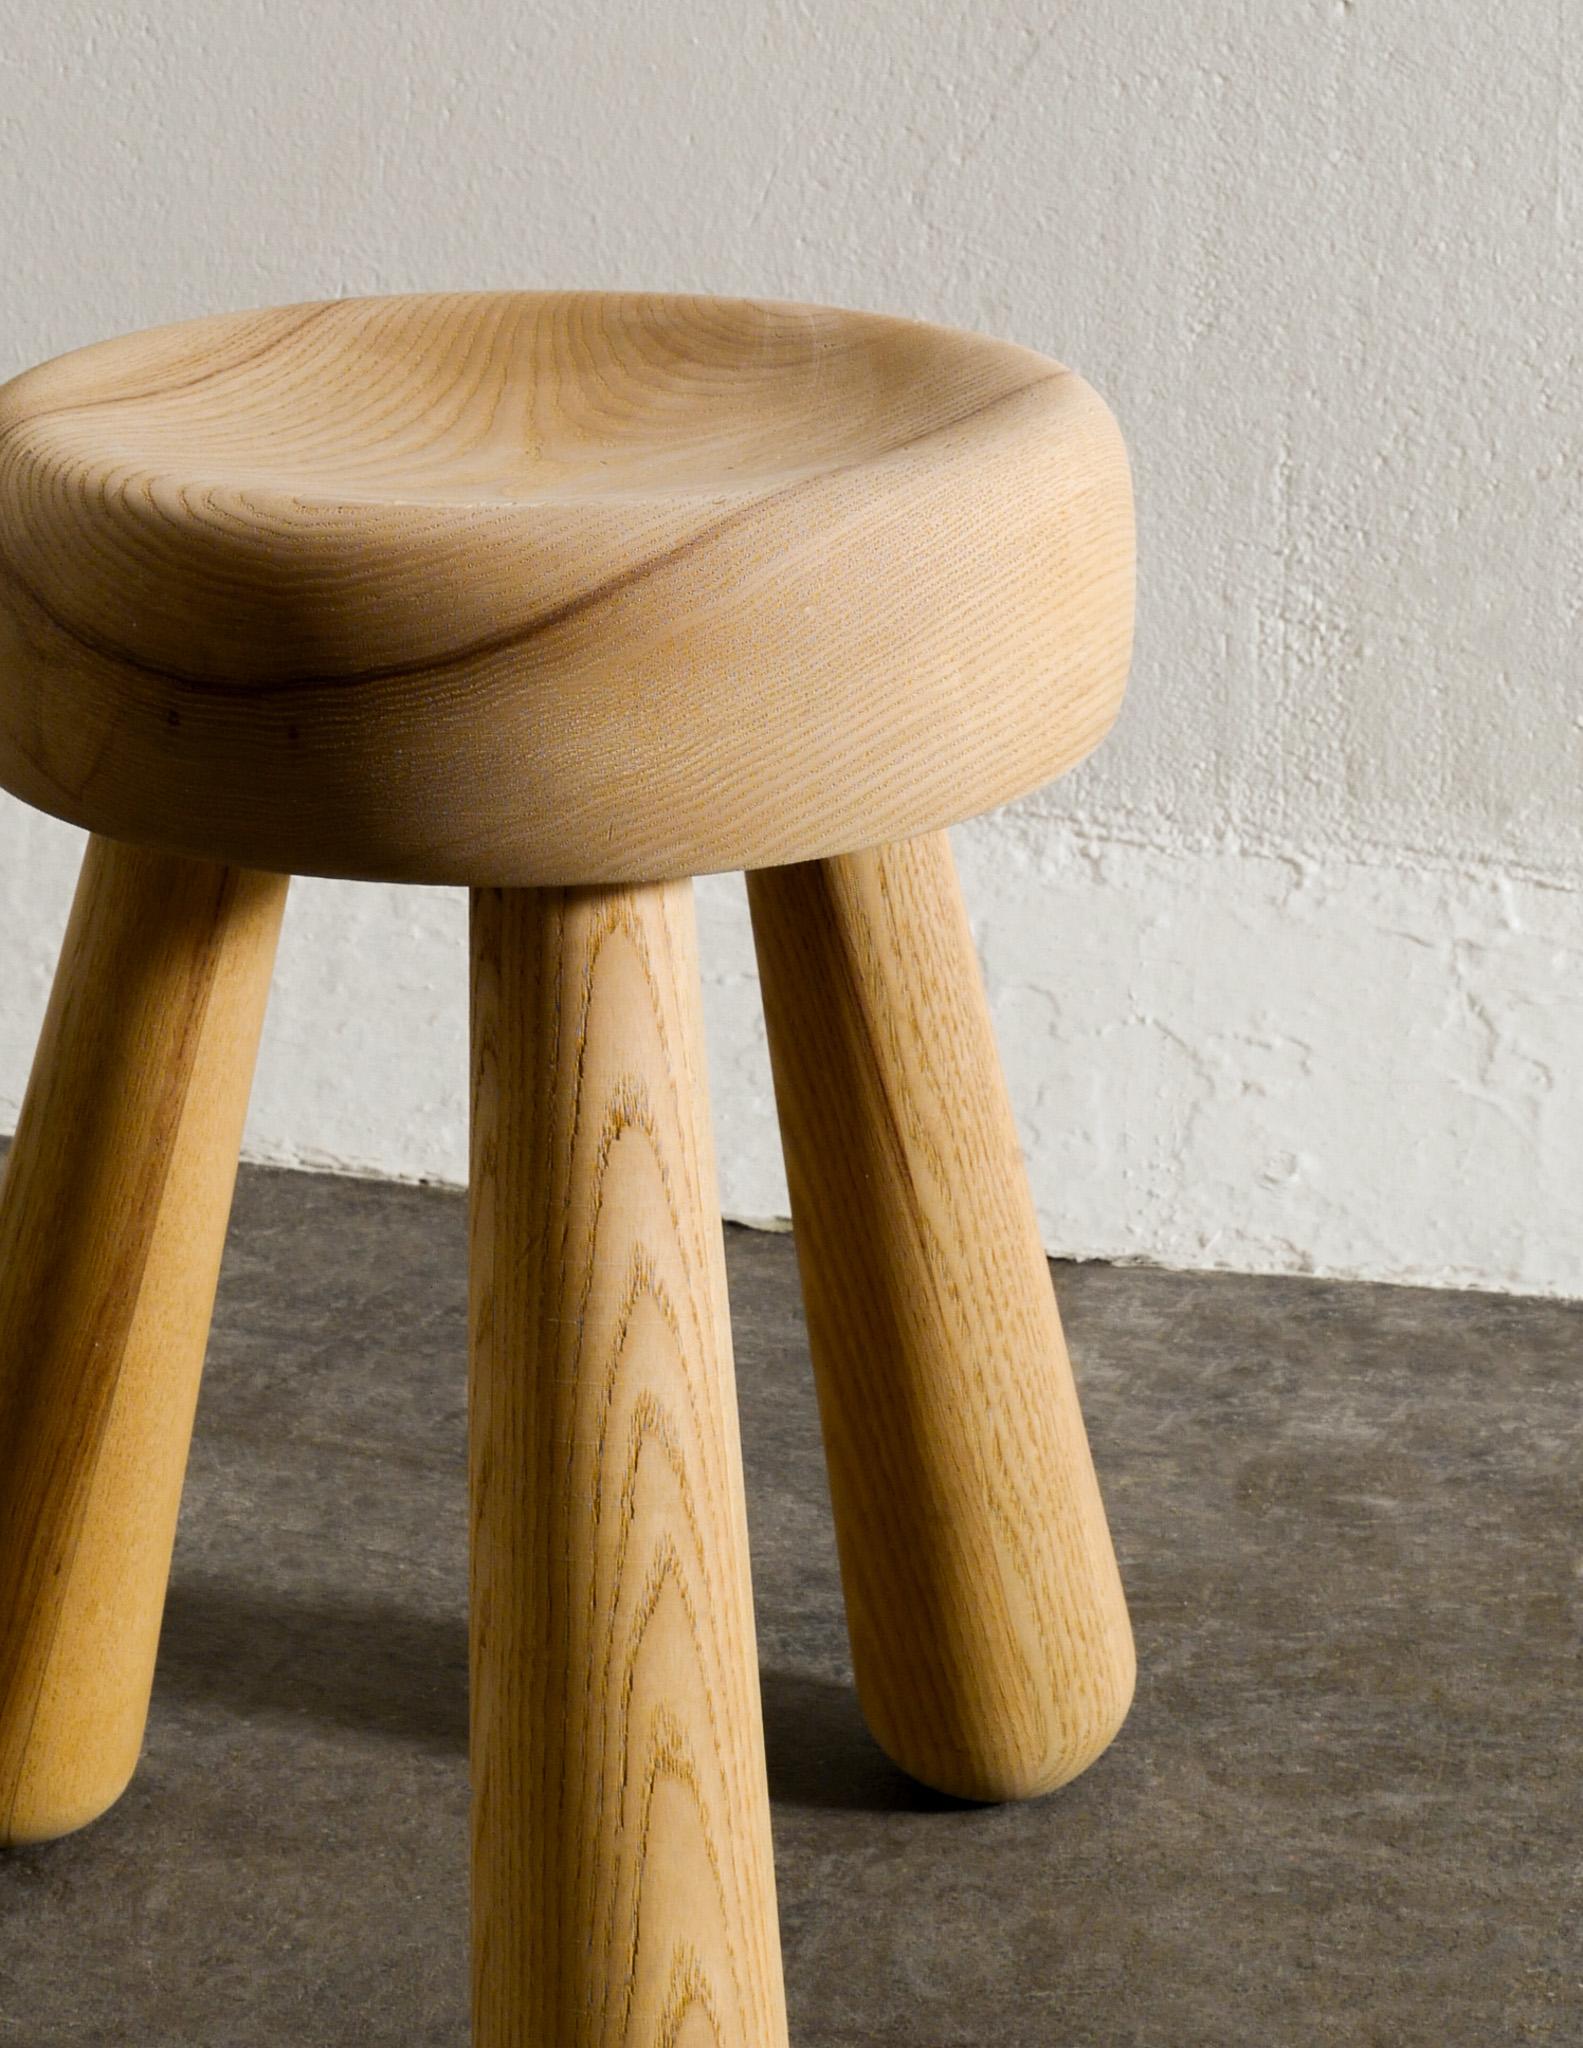 Swedish Wooden Low Mid Century Stool in Ash by Ingvar Hildingsson, 1970s For Sale